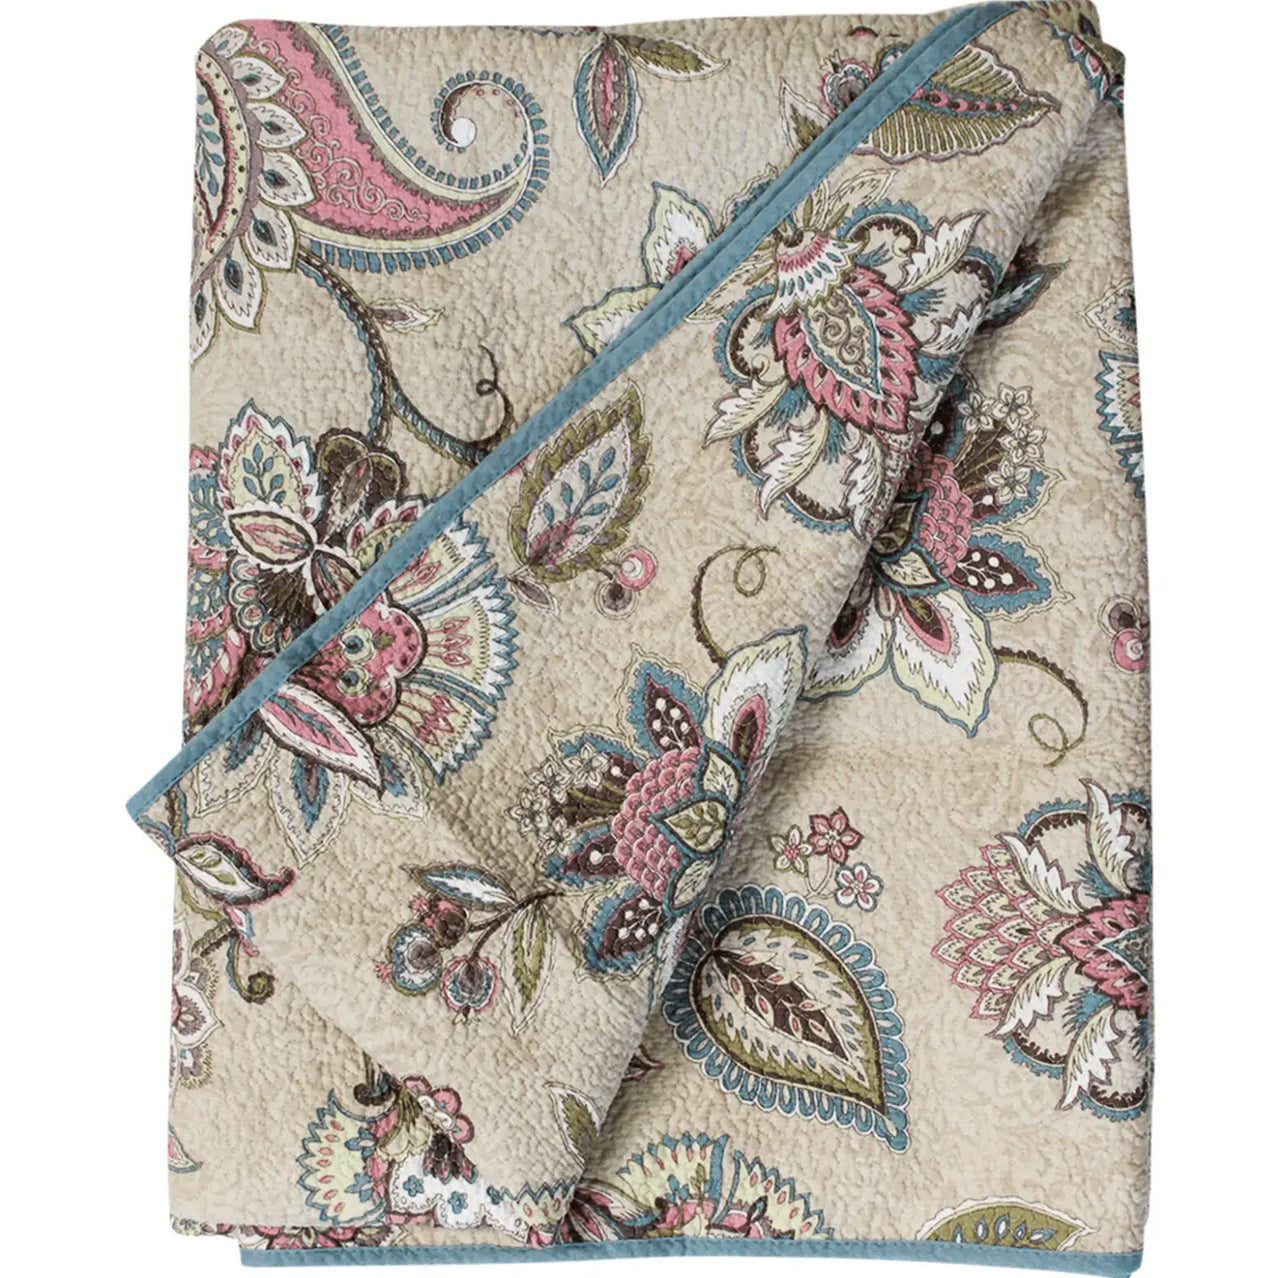 A Quilted Throw - Winter Flowers by LaVida blanket on a white background.